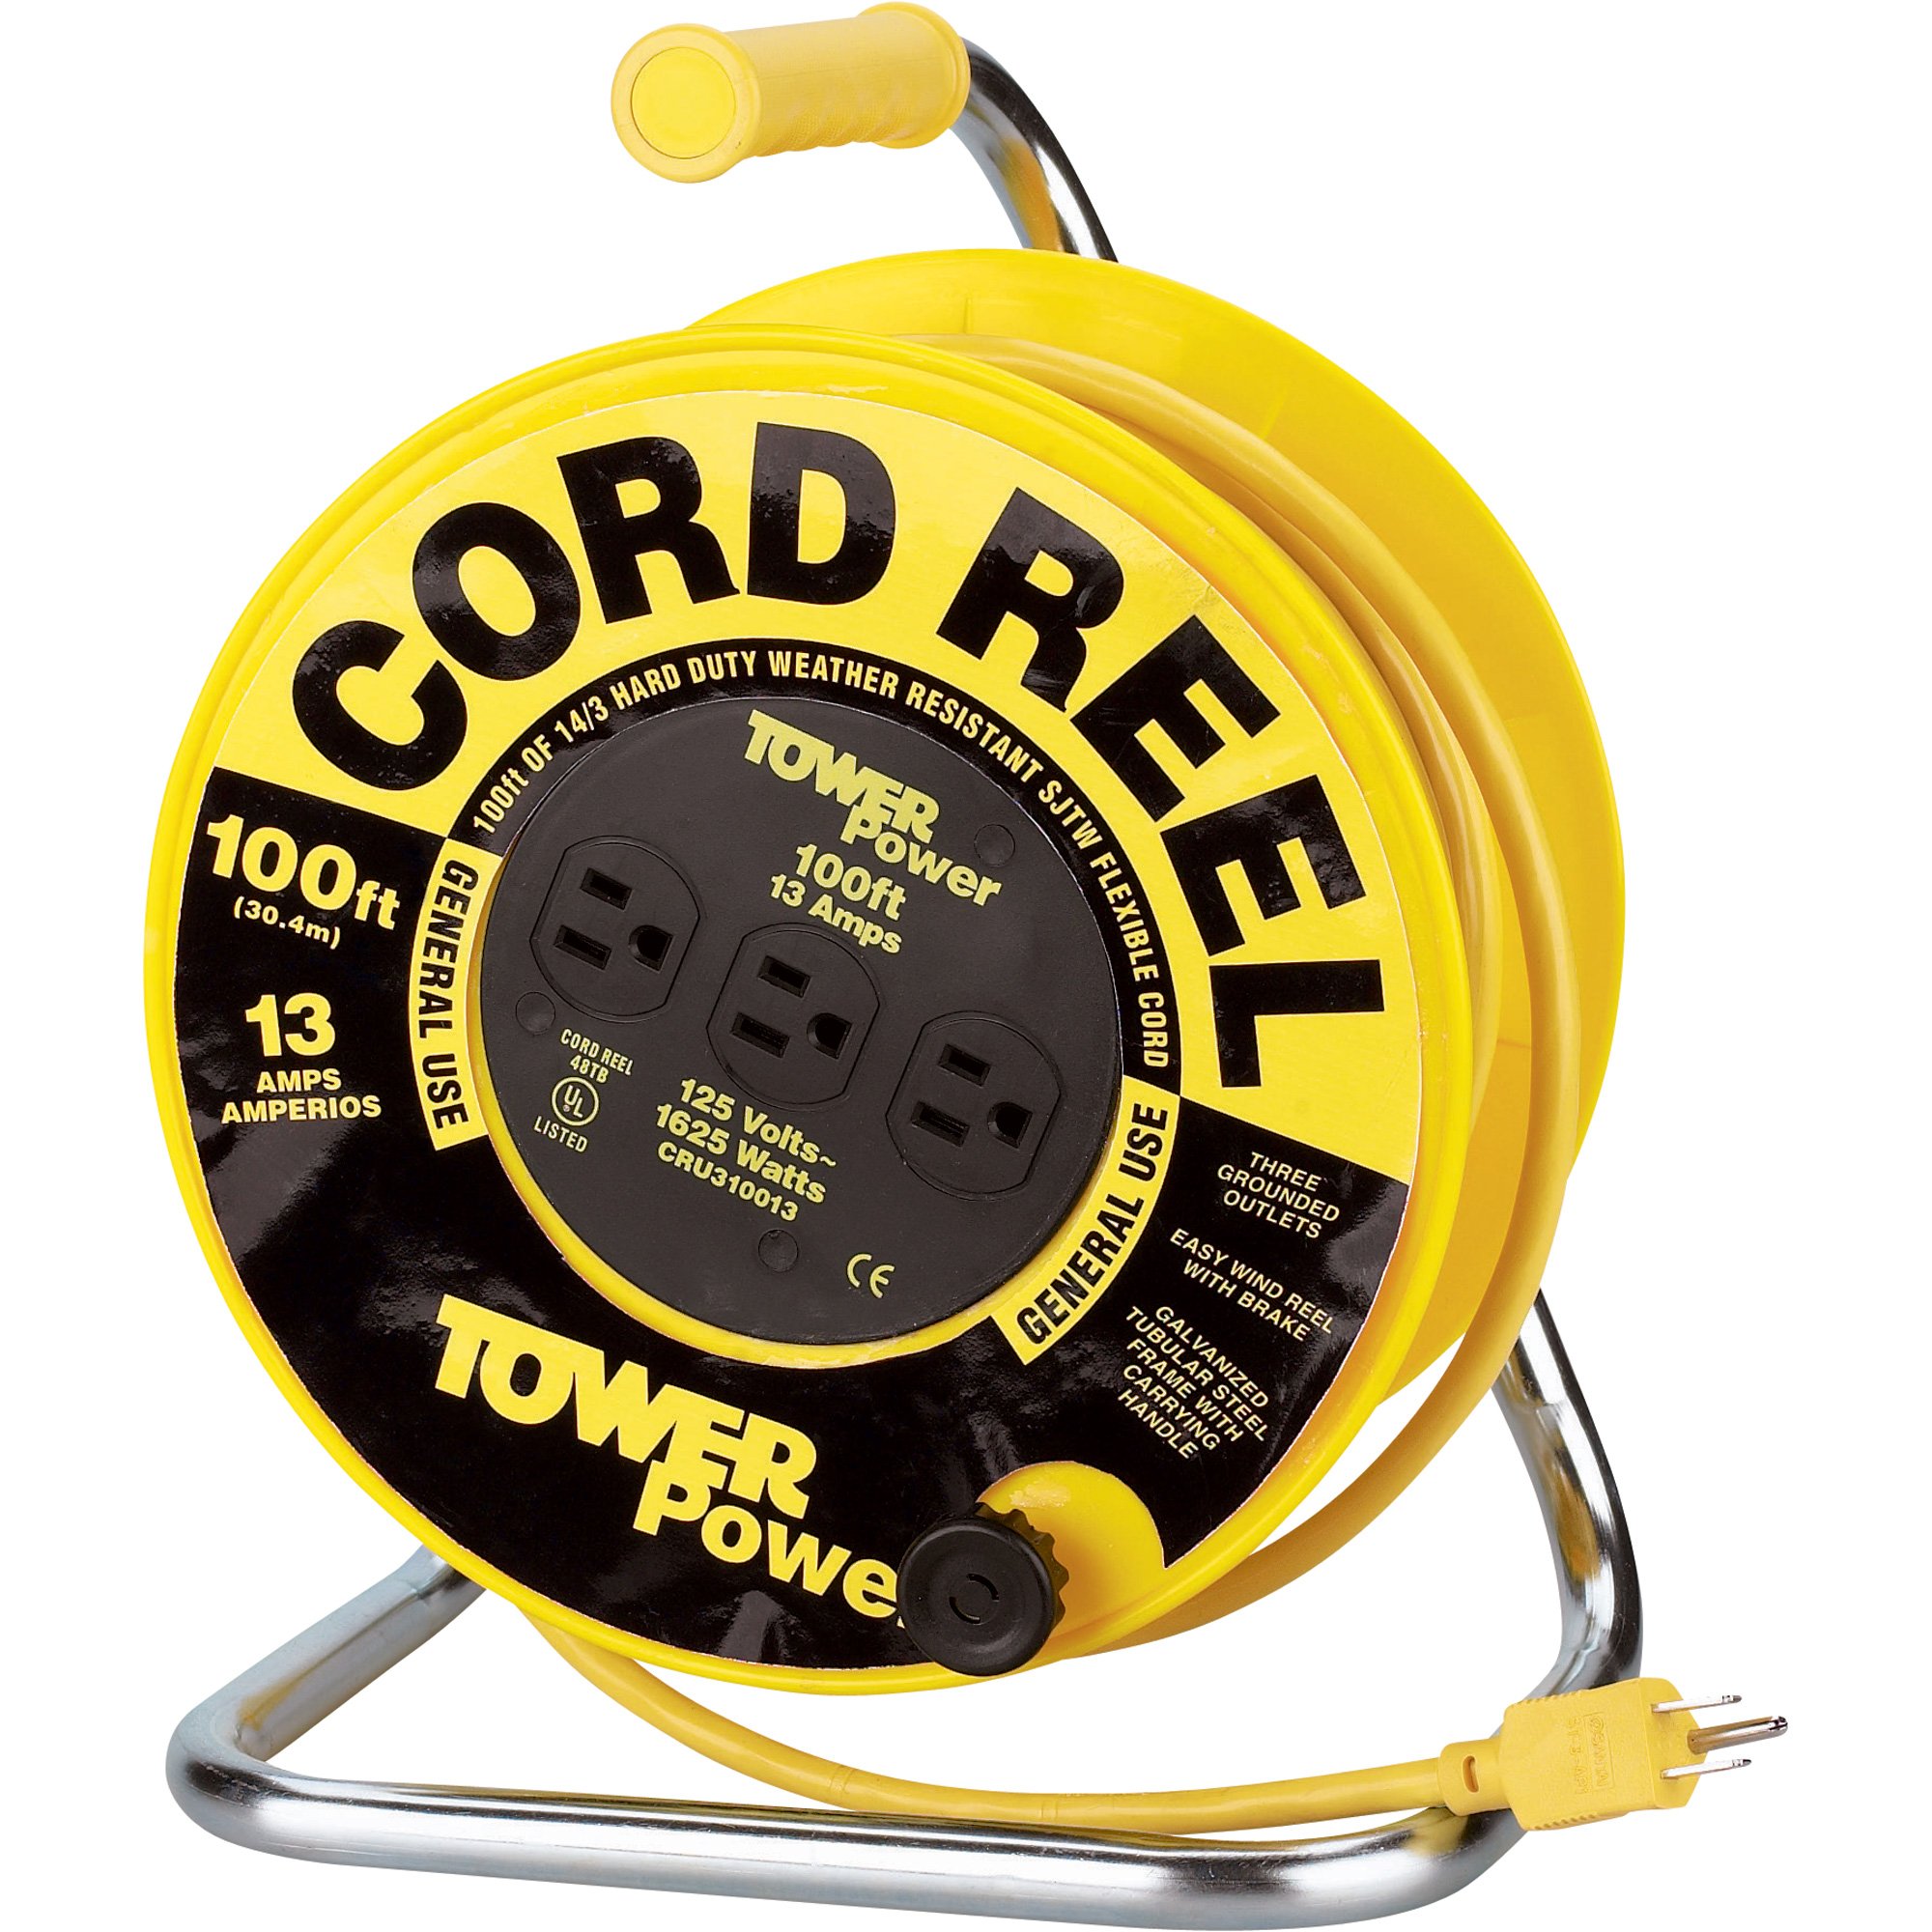 Northern Industrial Electrical Cord Reel — 15 Amp, 100ft.